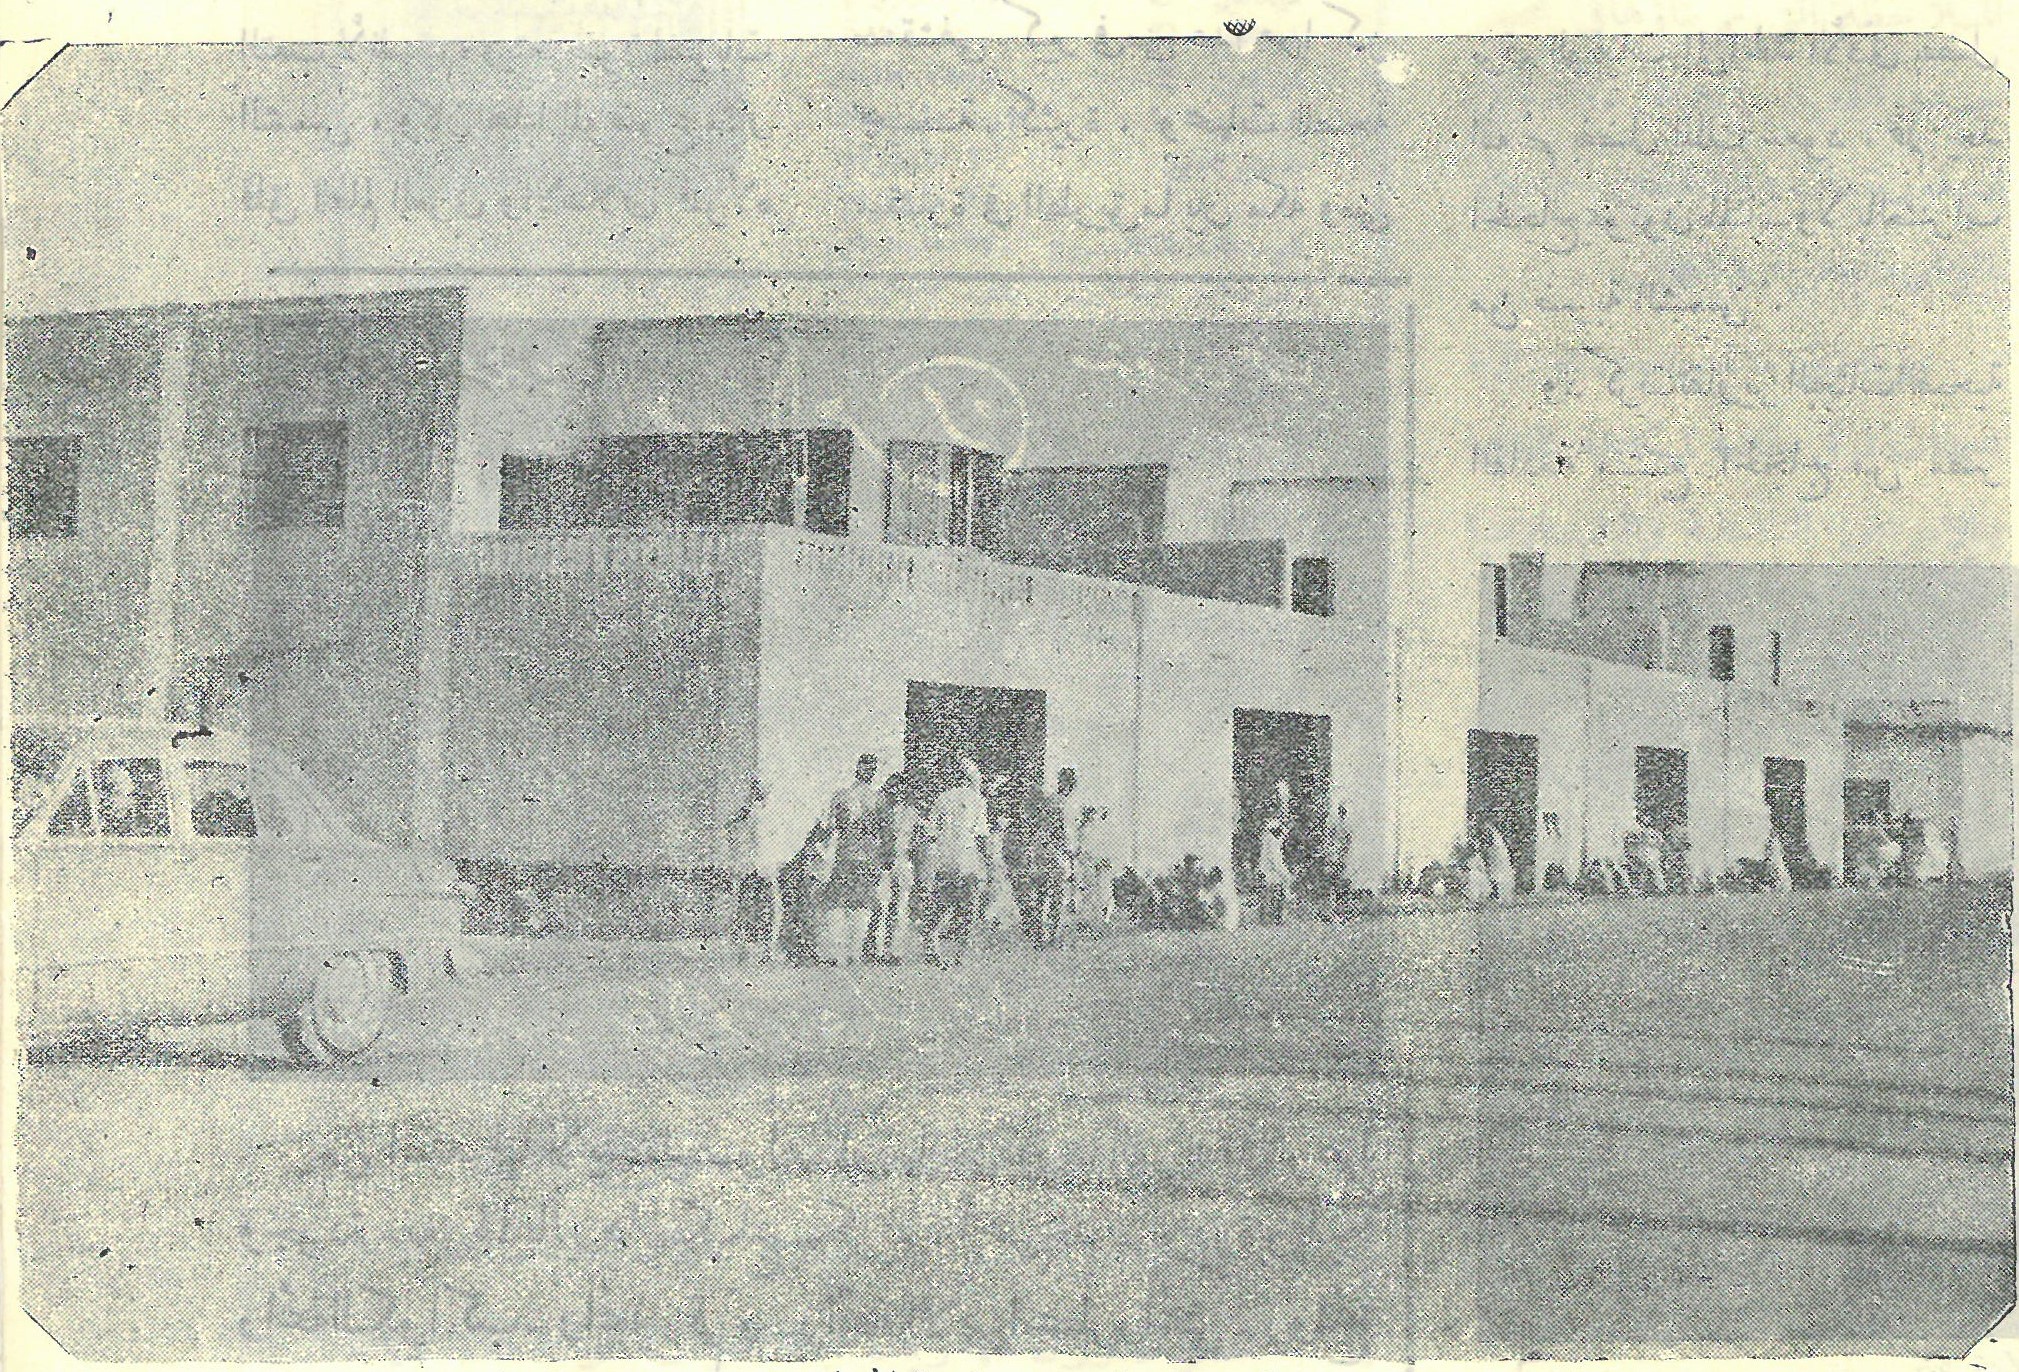 Health clinic of the city of pilgrims 1954